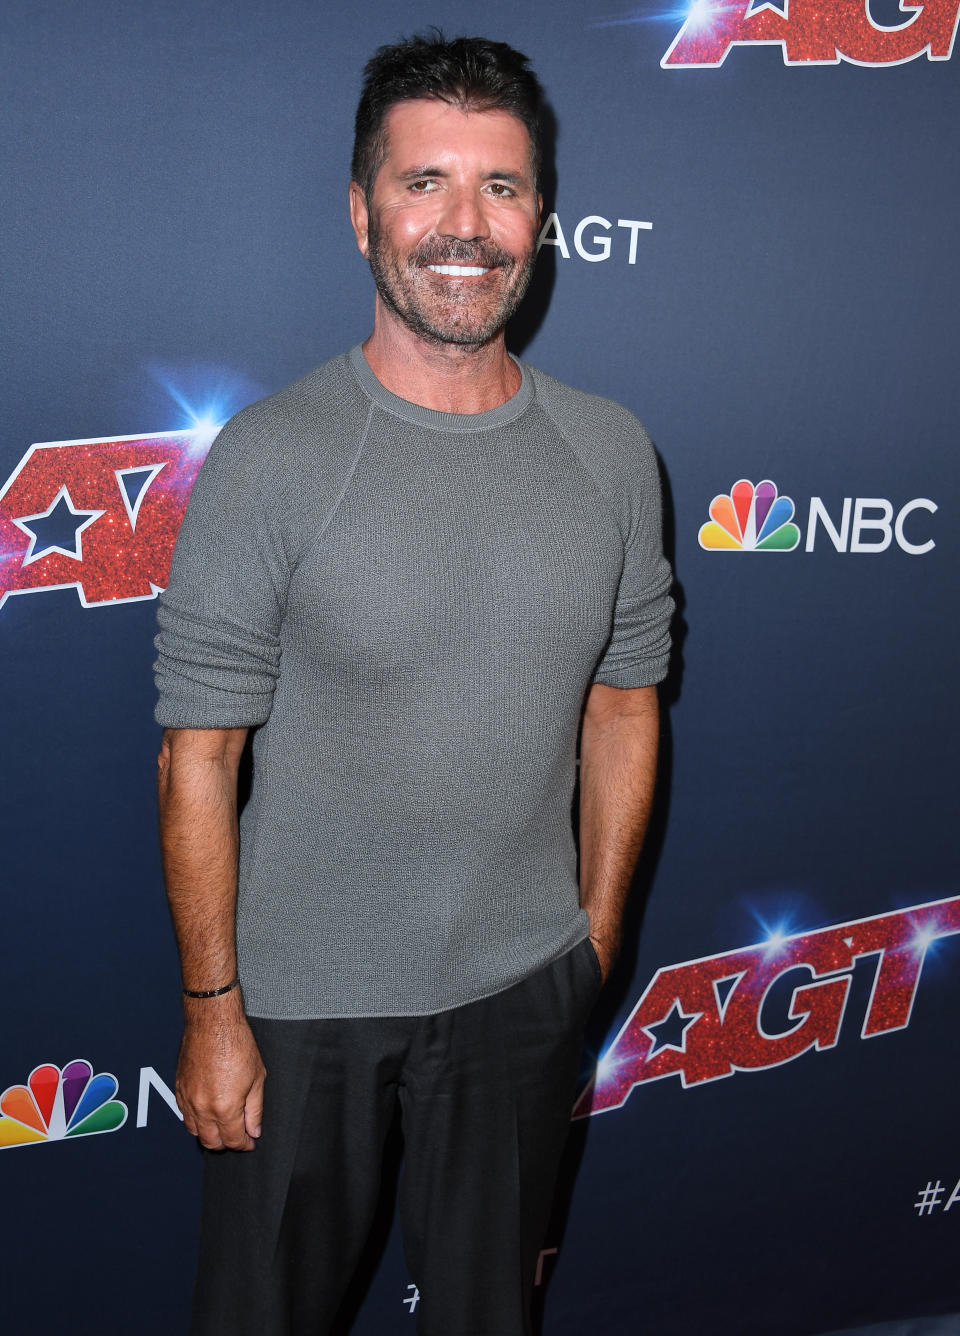 Simon was looking polished and svelte at this year's event. Photo: getty Images